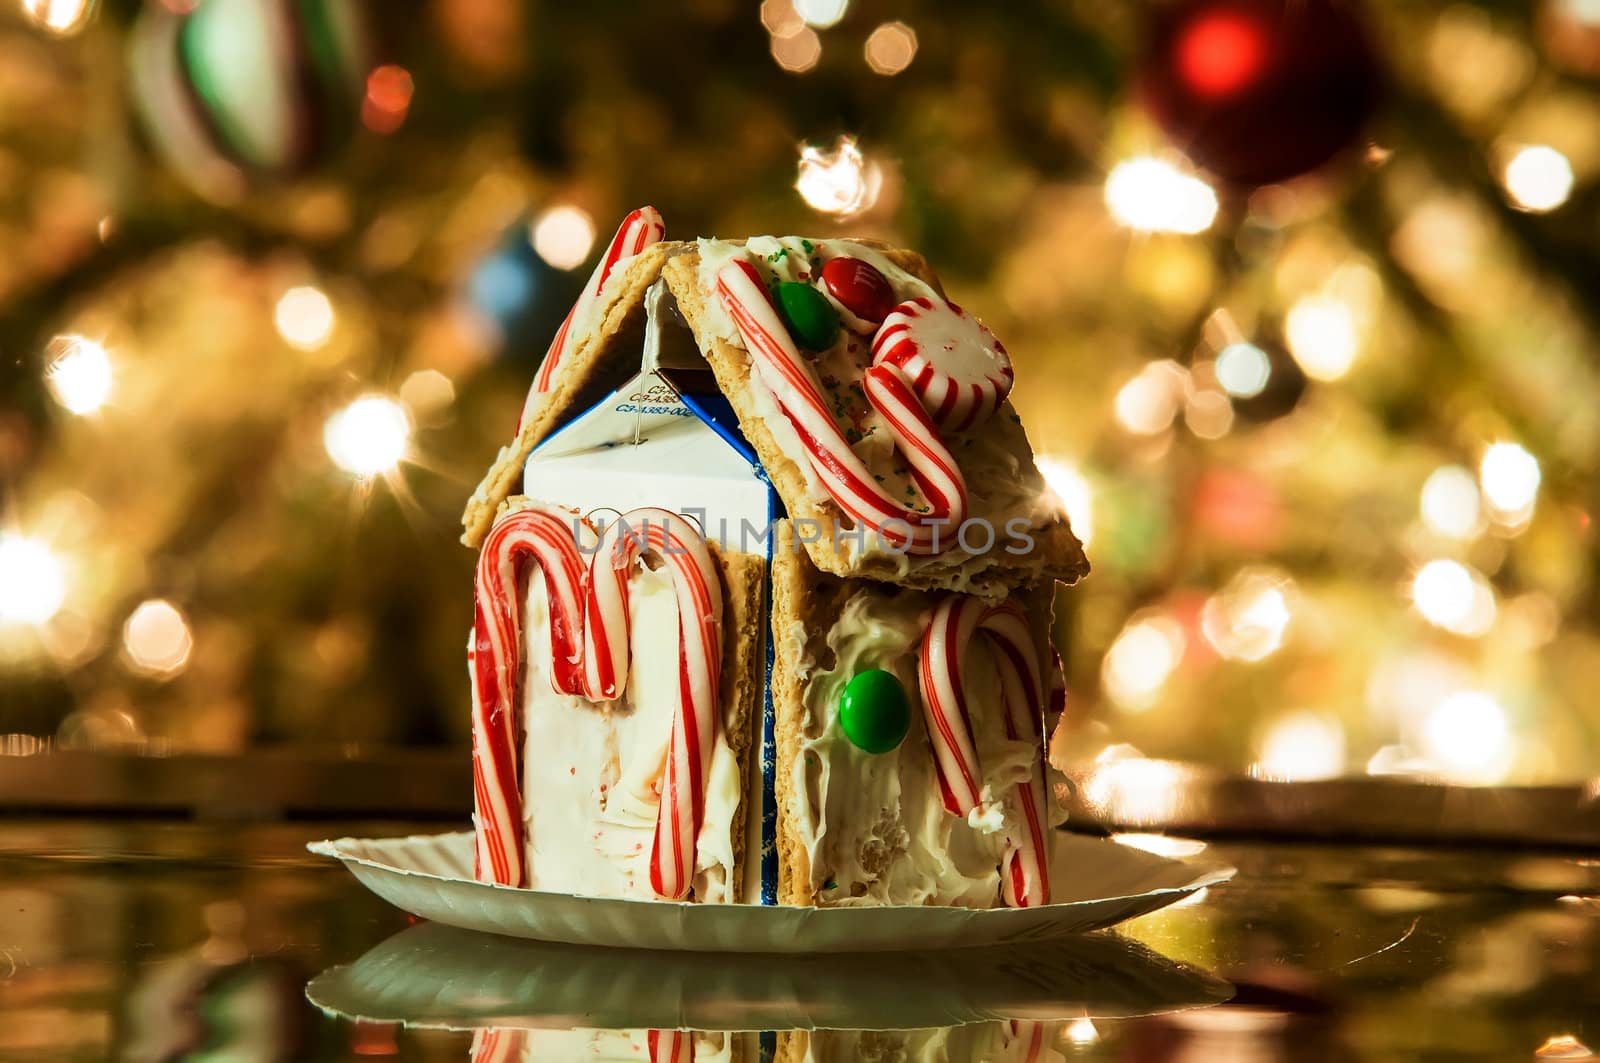 Gingerbread house against a background of christmas tree lights by digidreamgrafix